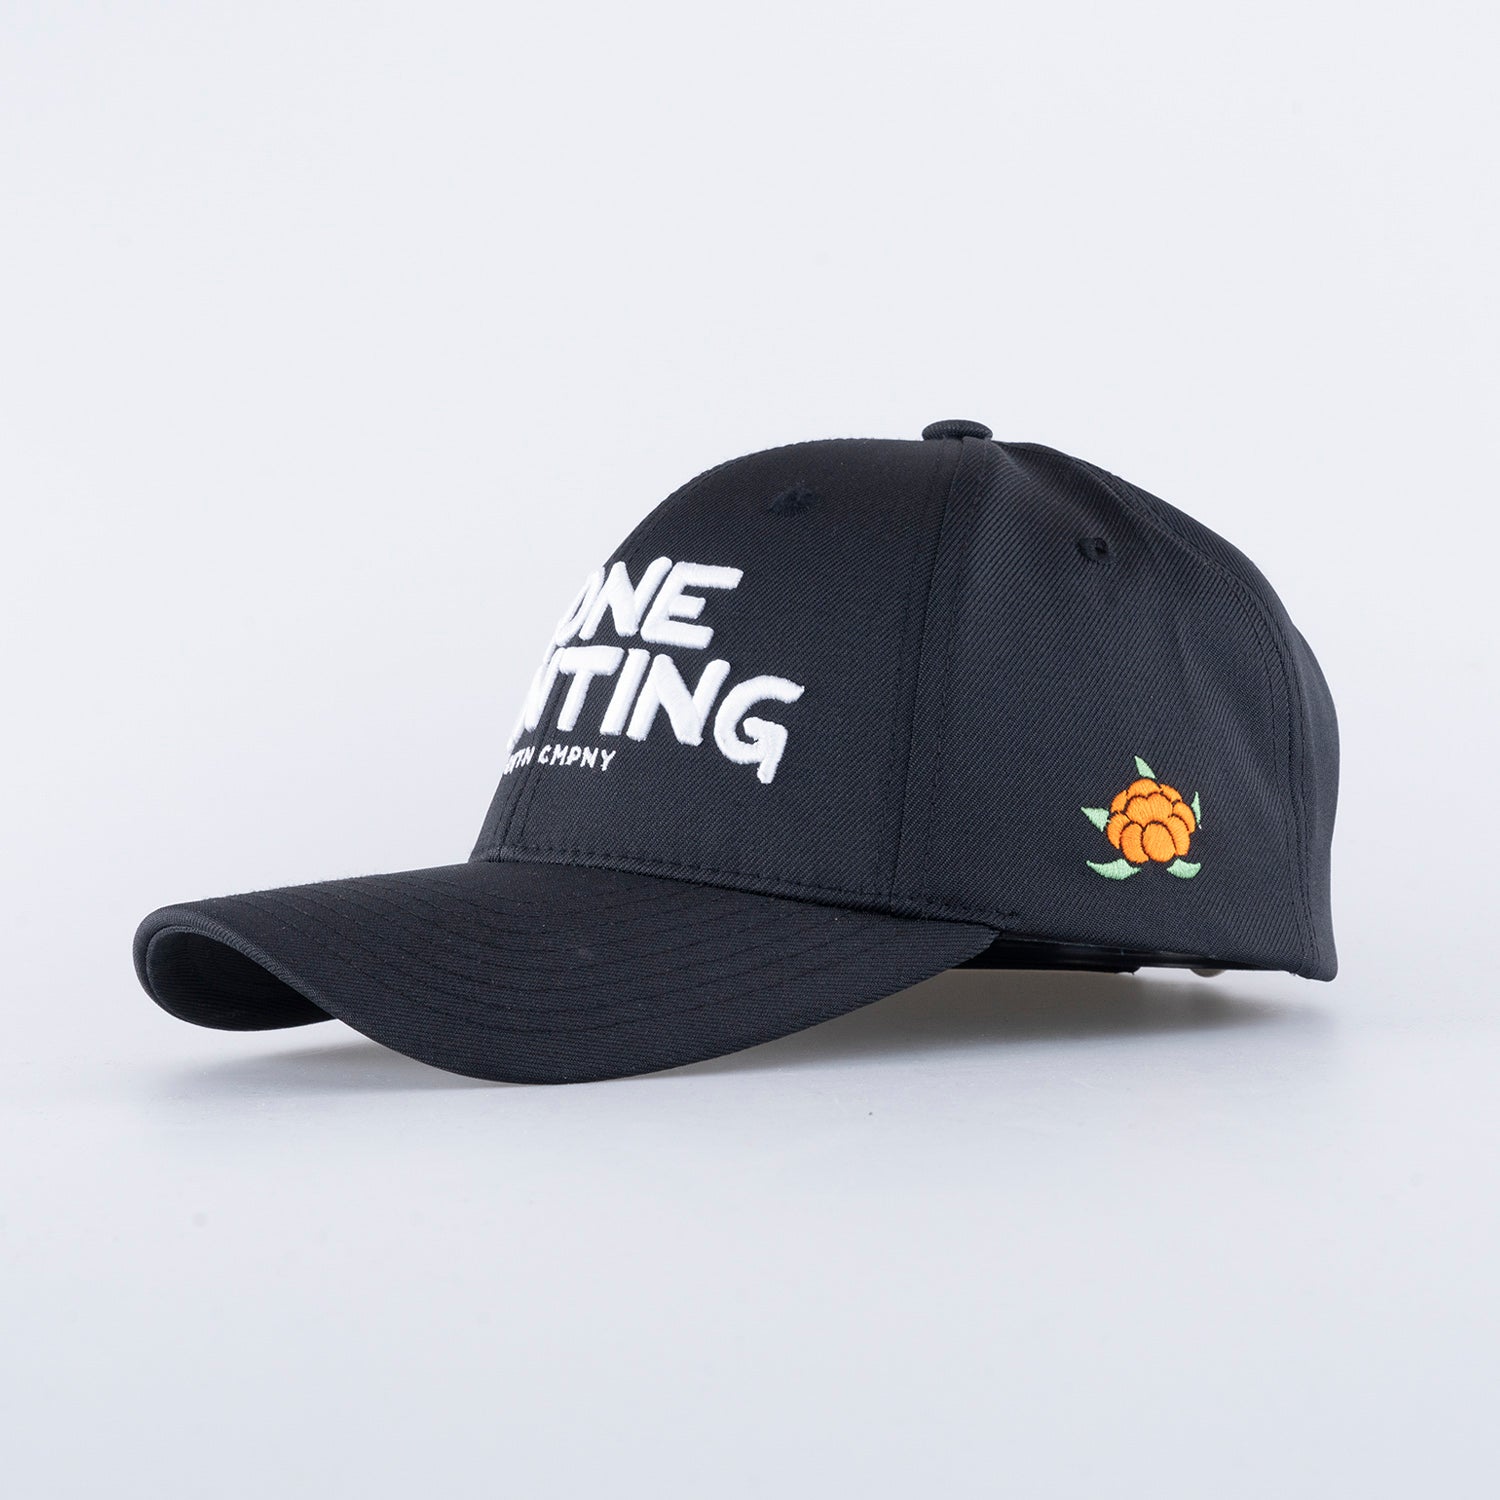 GONE HUNTING COMPACT CAP - HOOKED BLACK